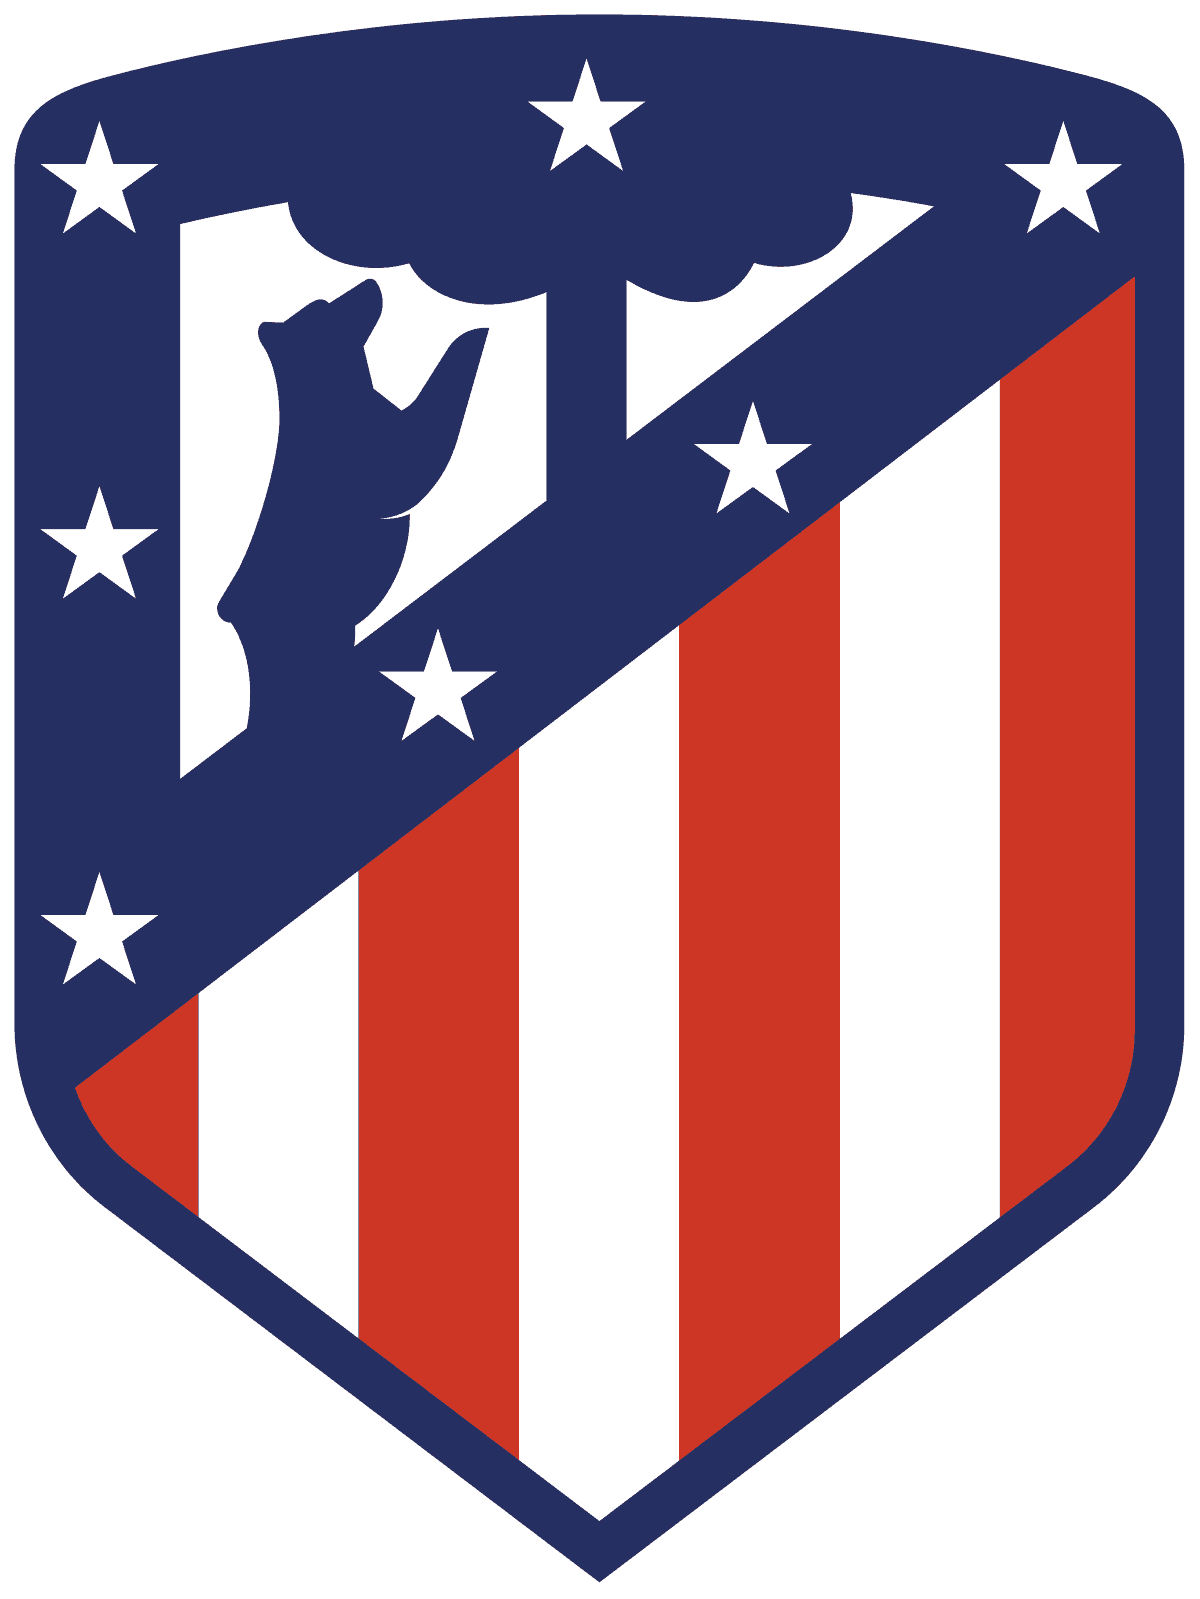 Atlético de Madrid News, Stats, Fixtures and Results - Yahoo Sports